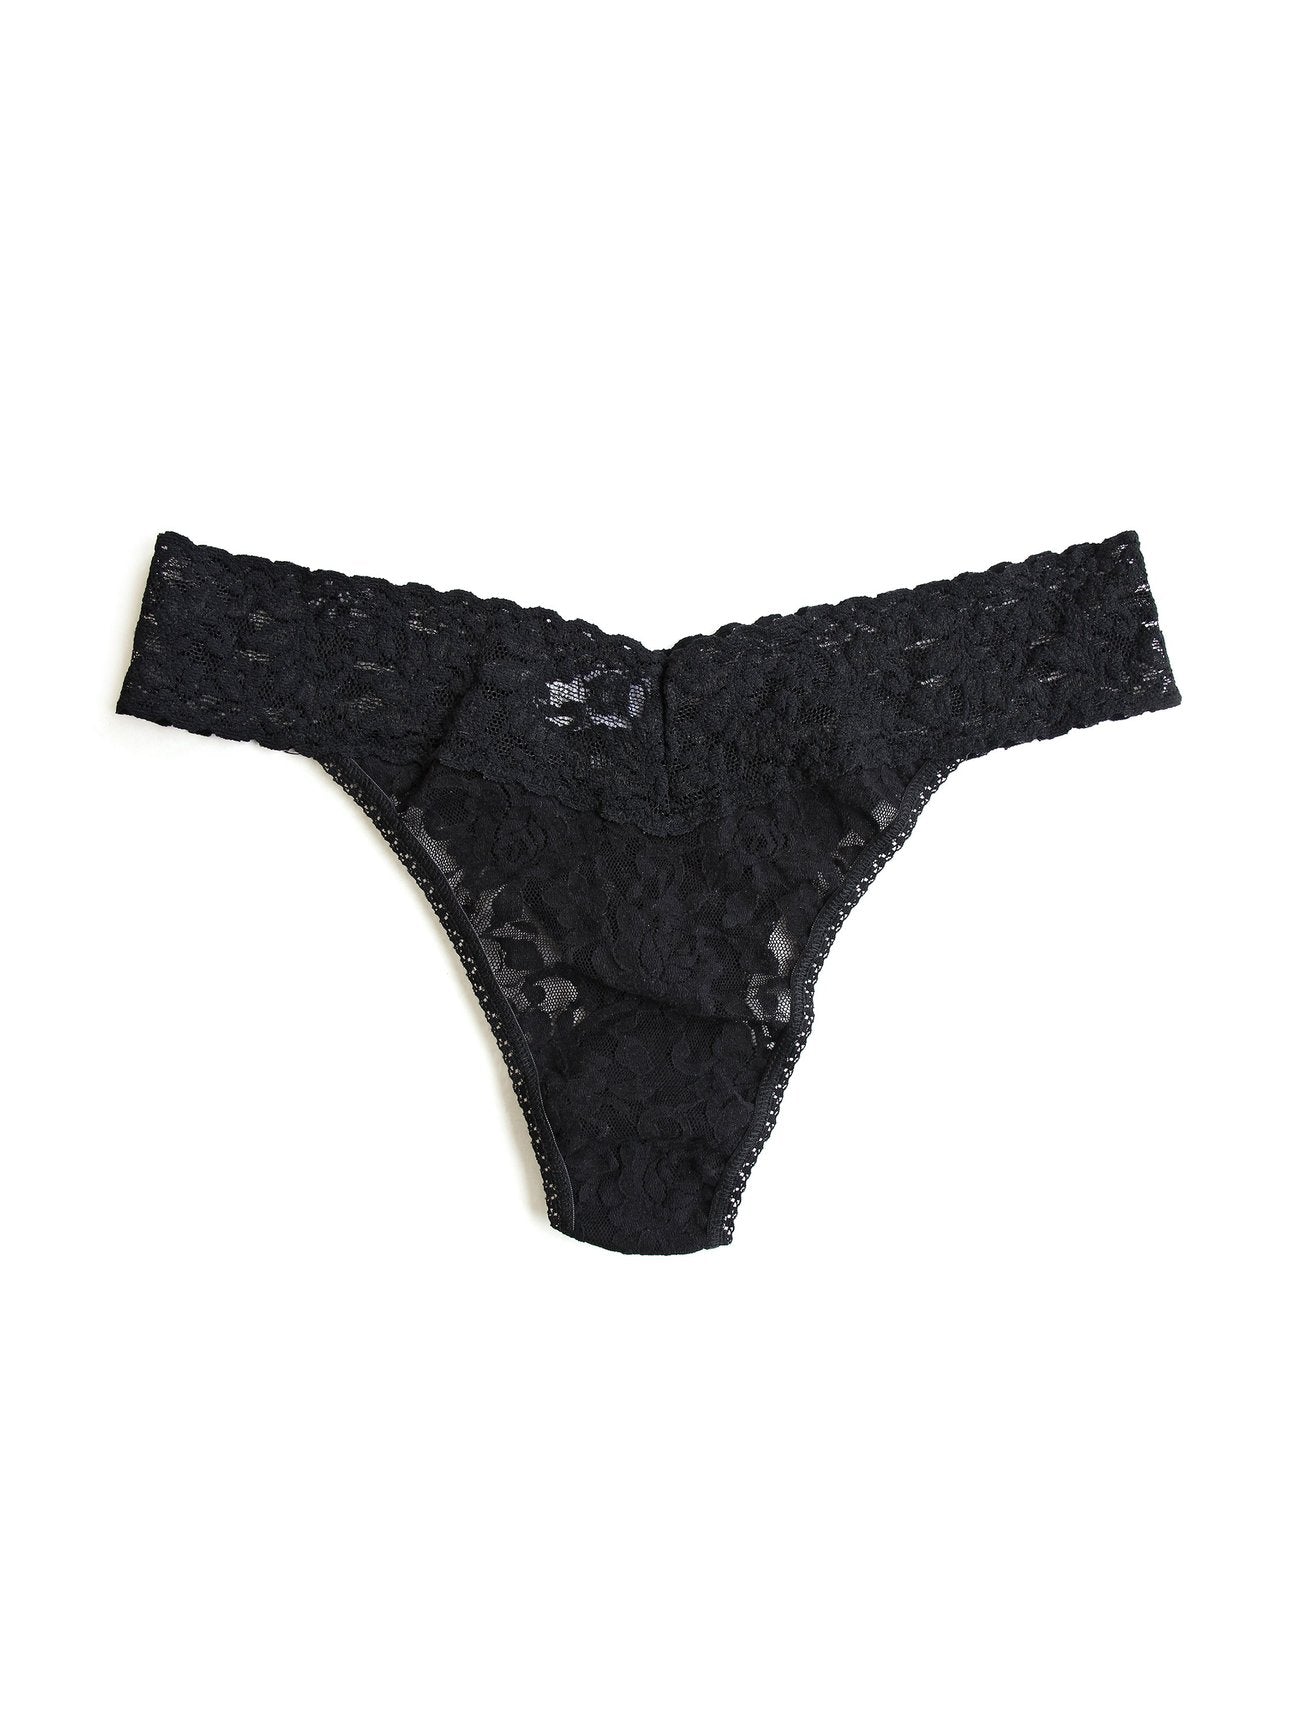 Hanky Panky Signature Lace Original Rise Thong-Packaged 4811p - 0